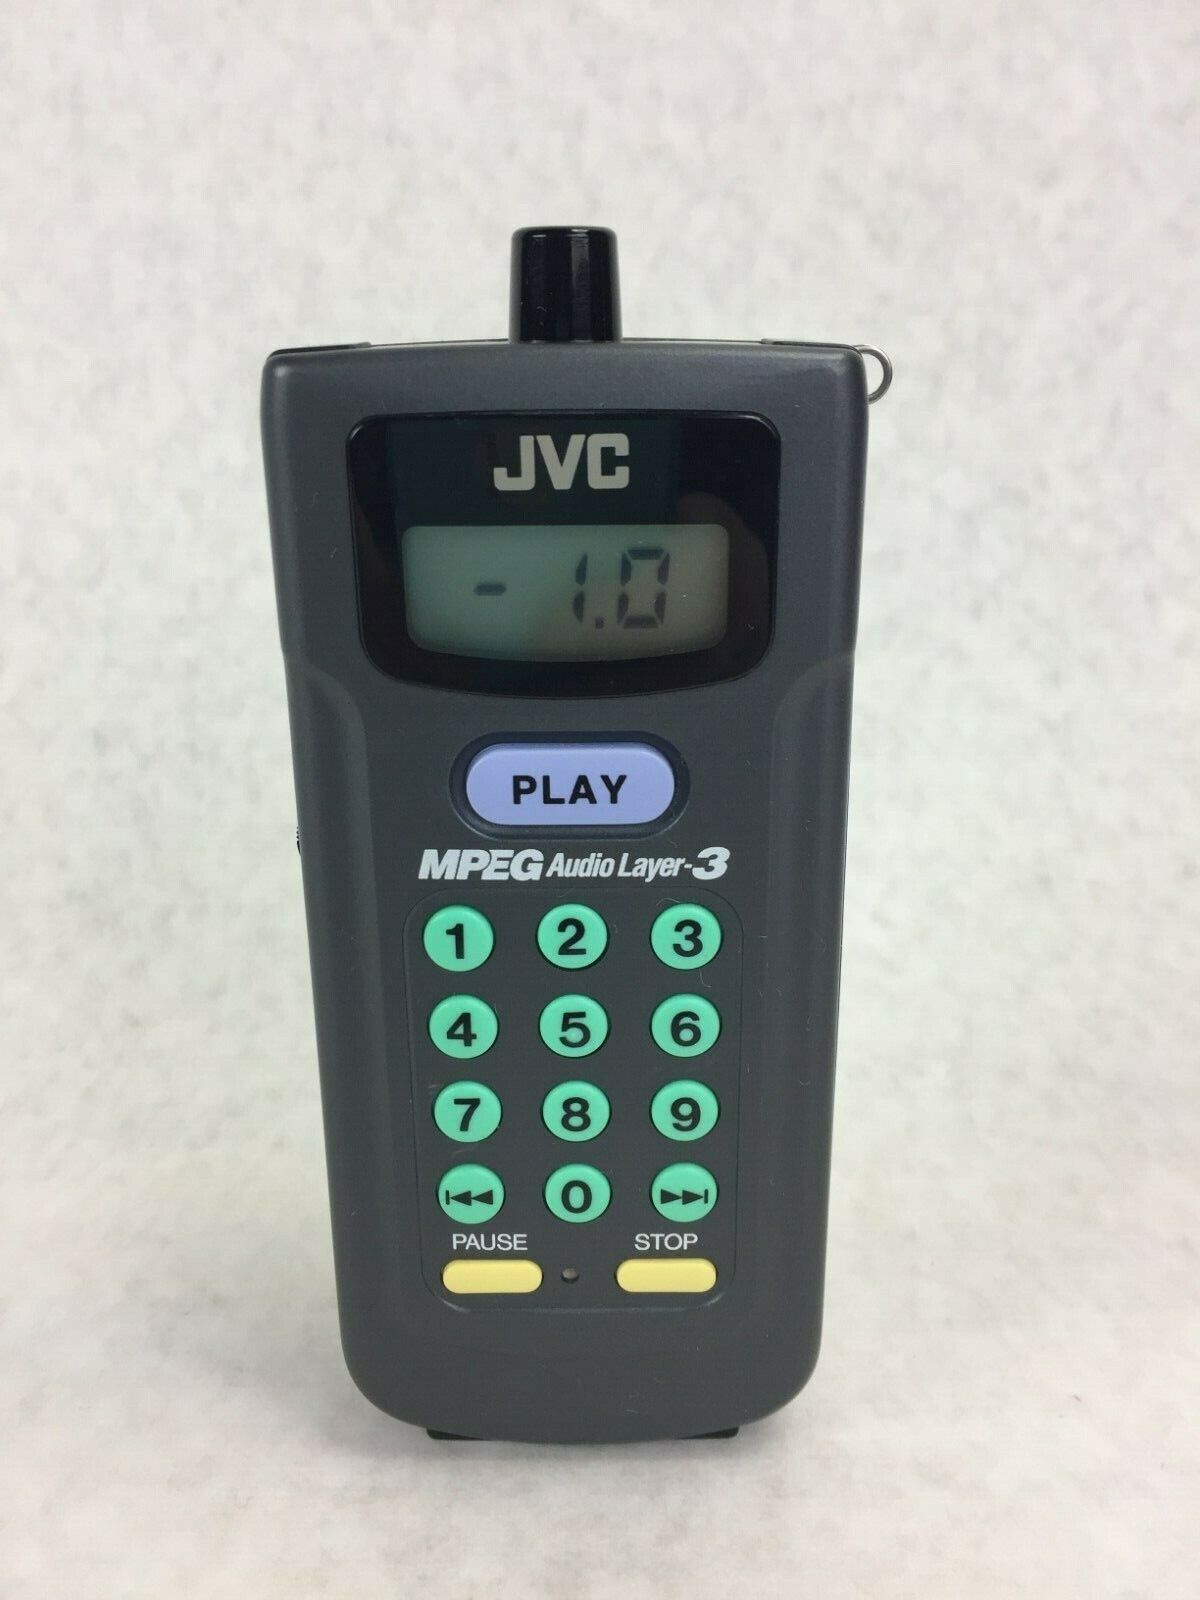 JVC XA-GP3BK Portable ROM Player  MPEG Audio Layer-3   Doesnt Hold Charge